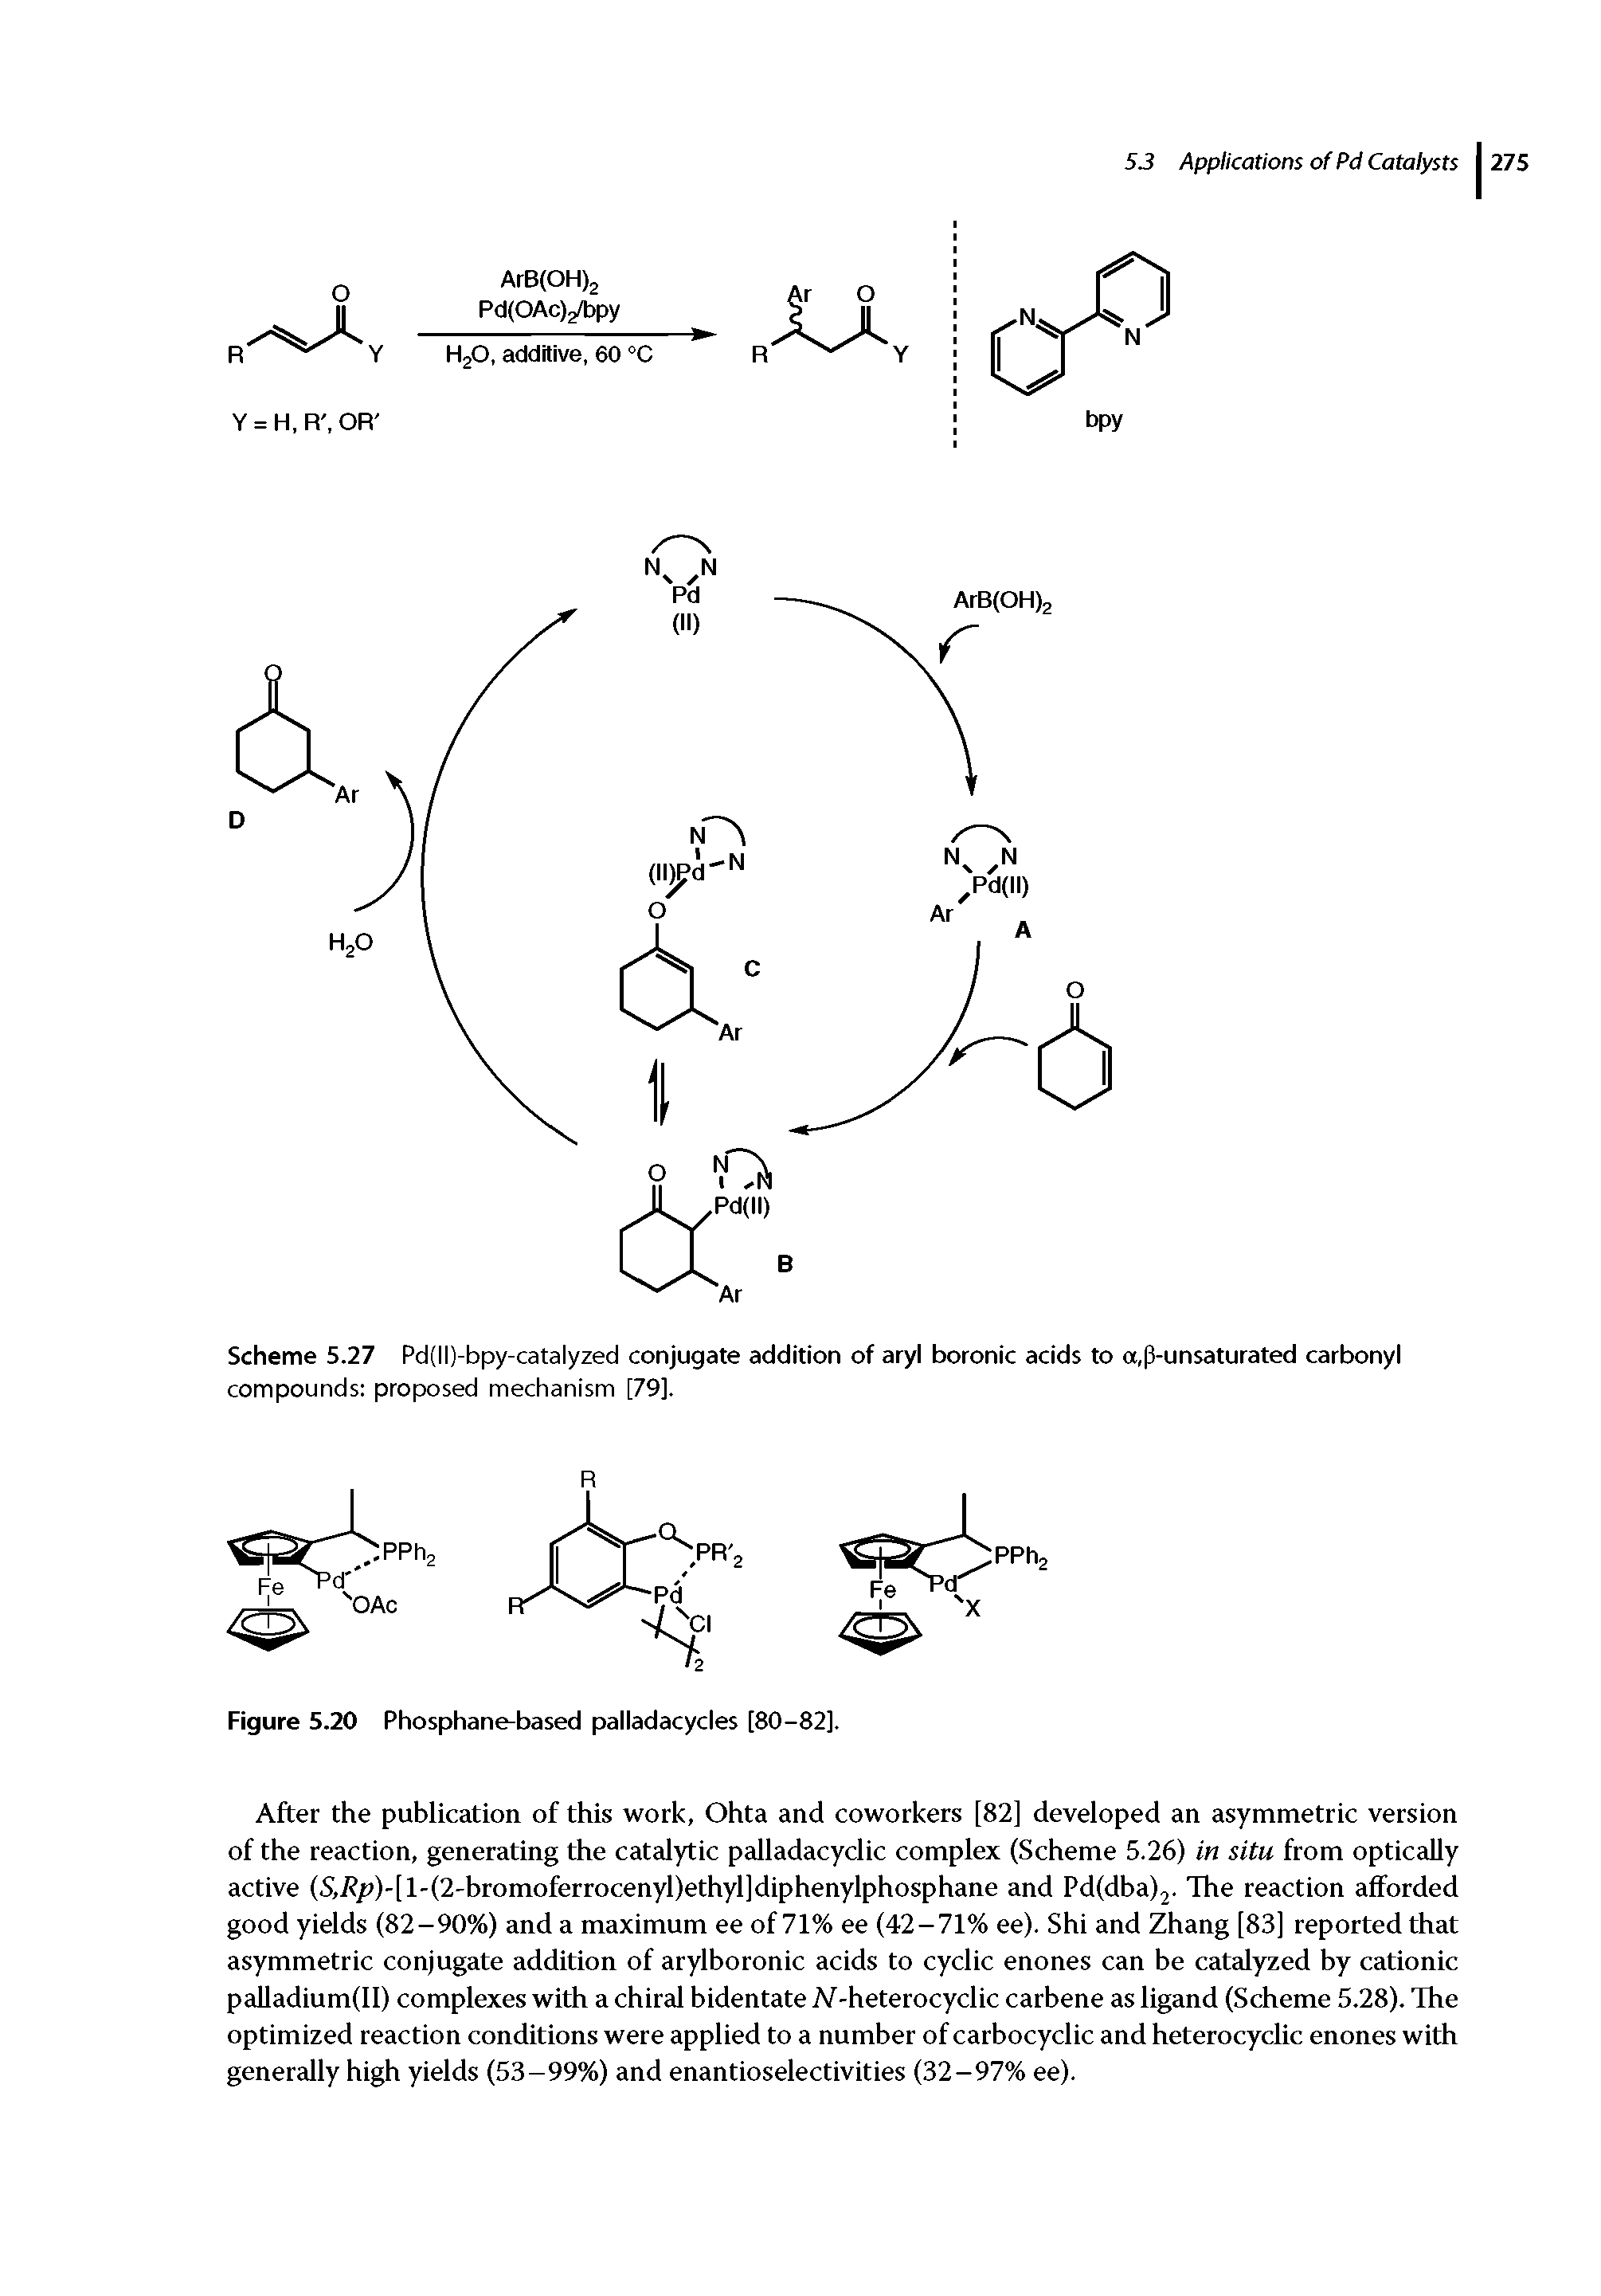 Scheme 5.27 Pd(ll)-bpy-catalyzed conjugate addition of aryl boronic acids to a,p-unsaturated carbonyl...